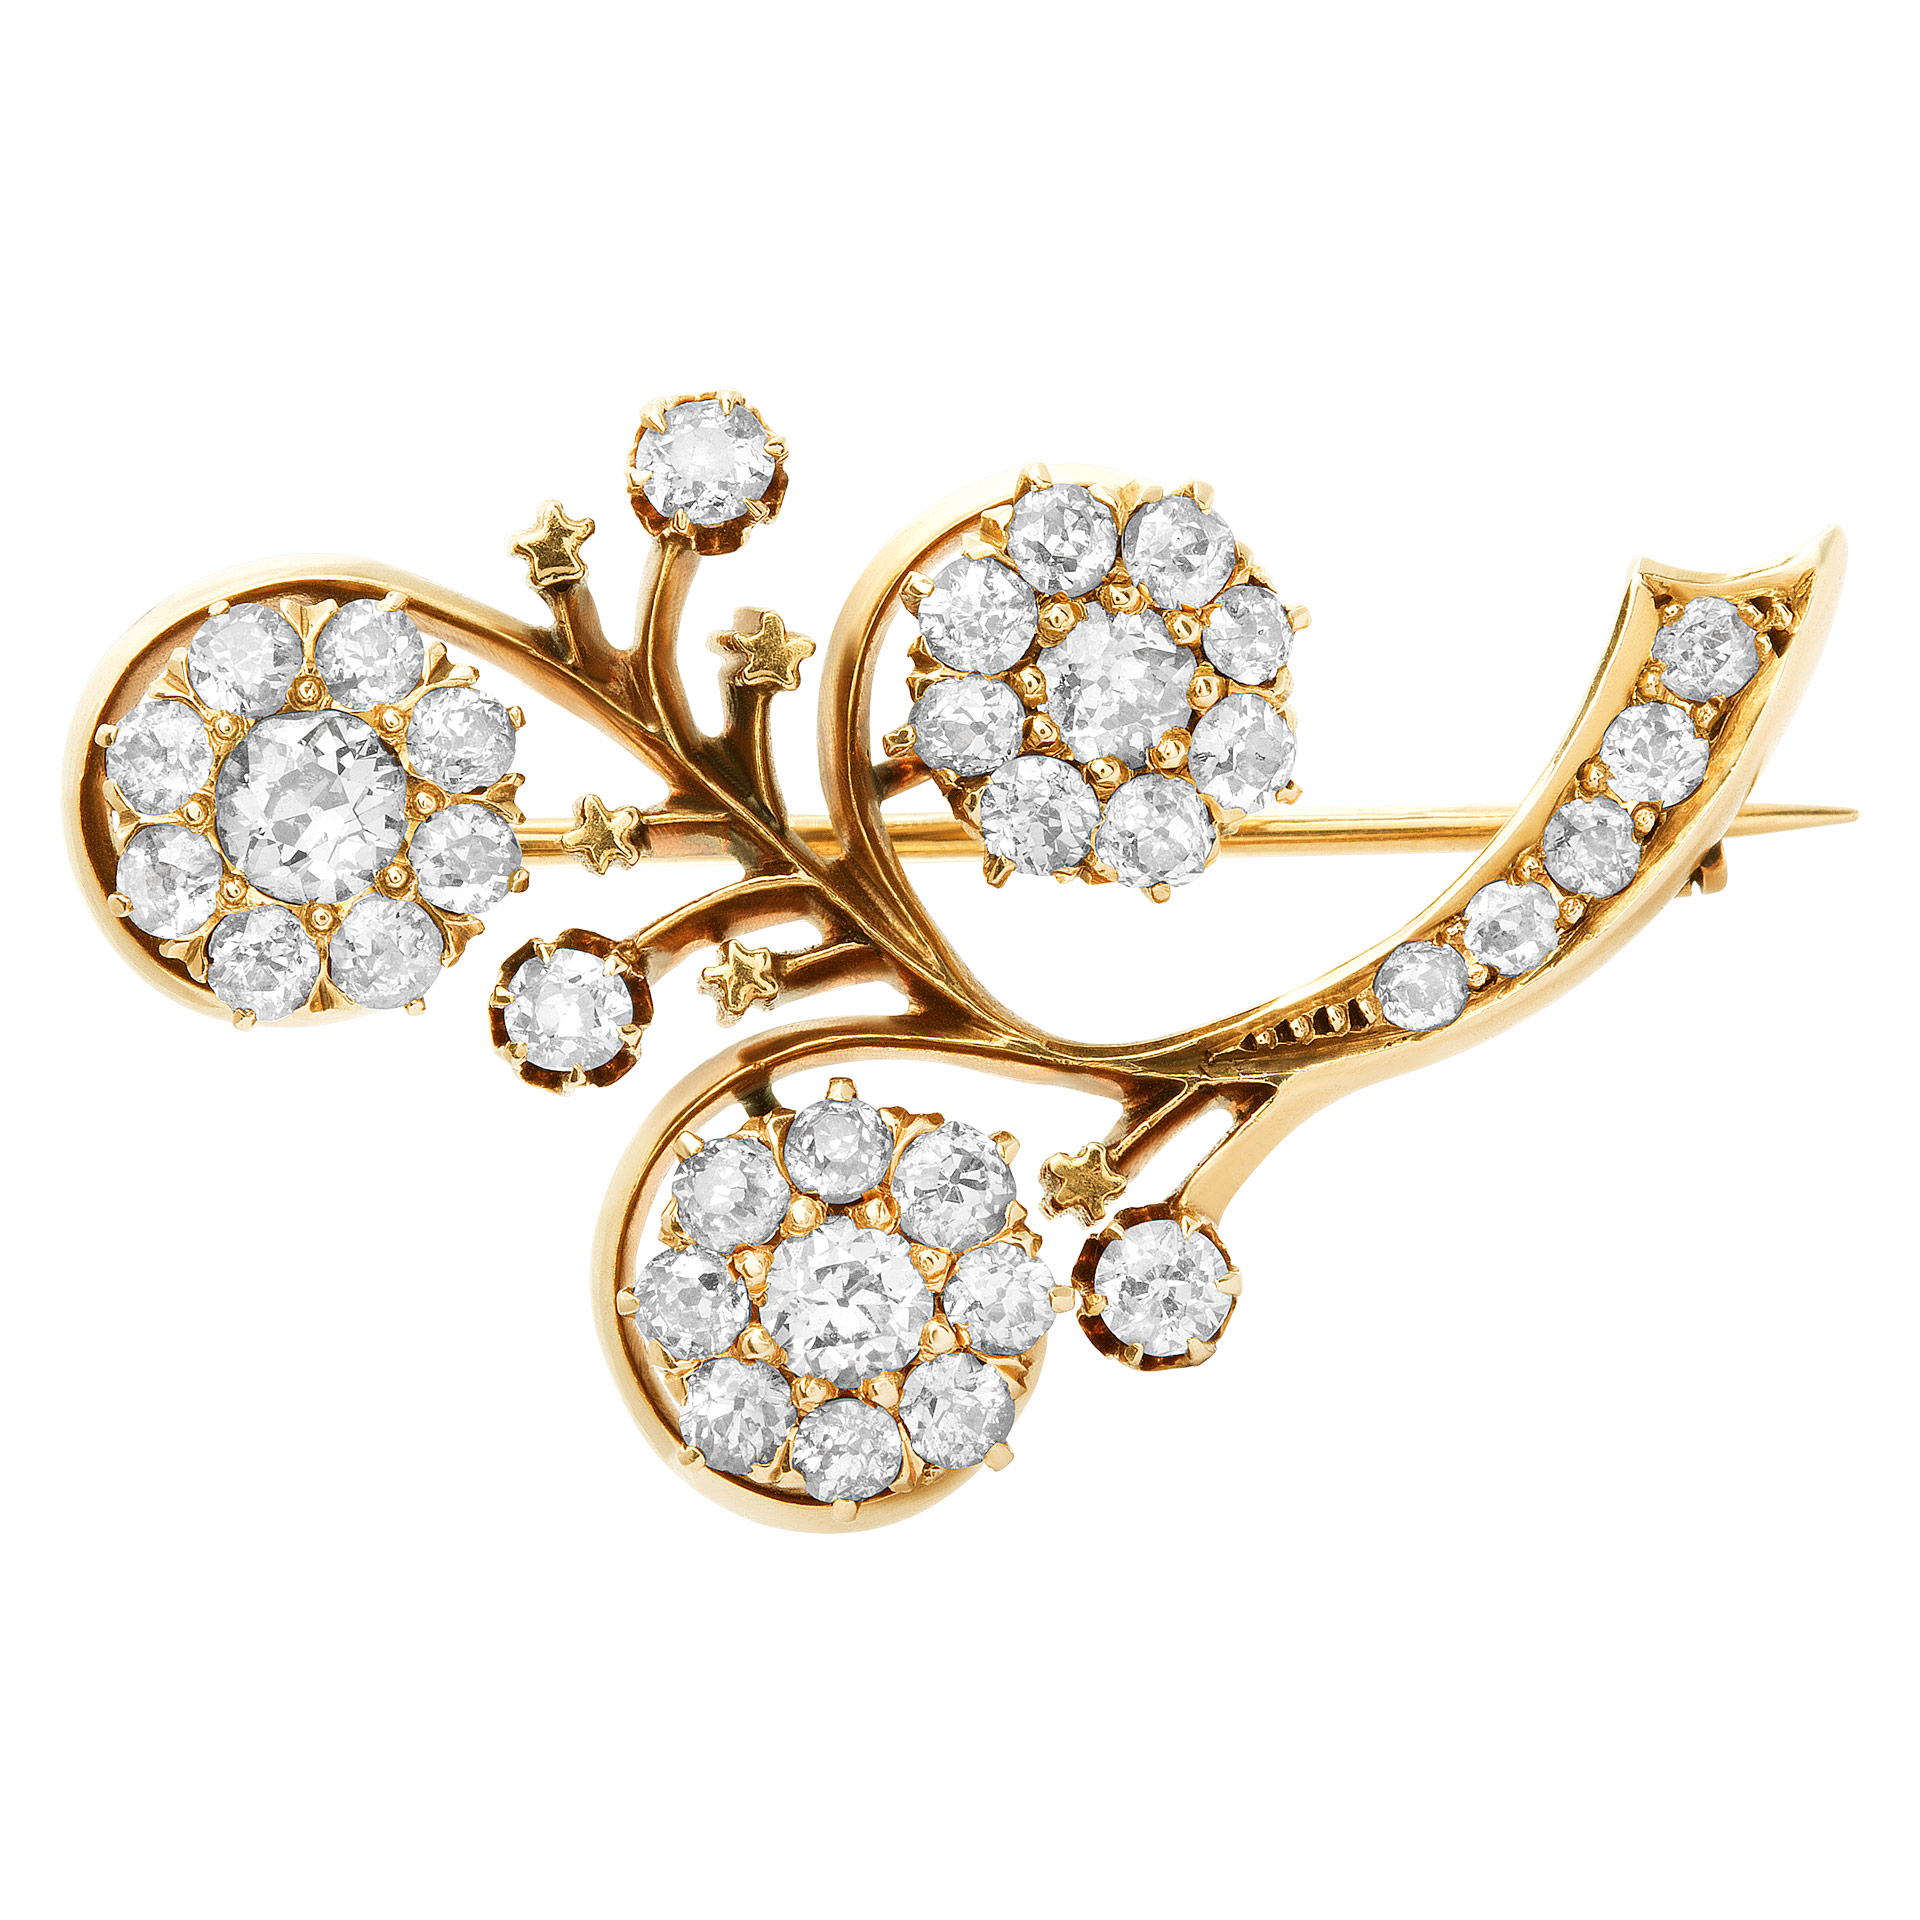 Antique Edwardian flowers and stars pin in 14k with over 3 carats in diamonds image 1